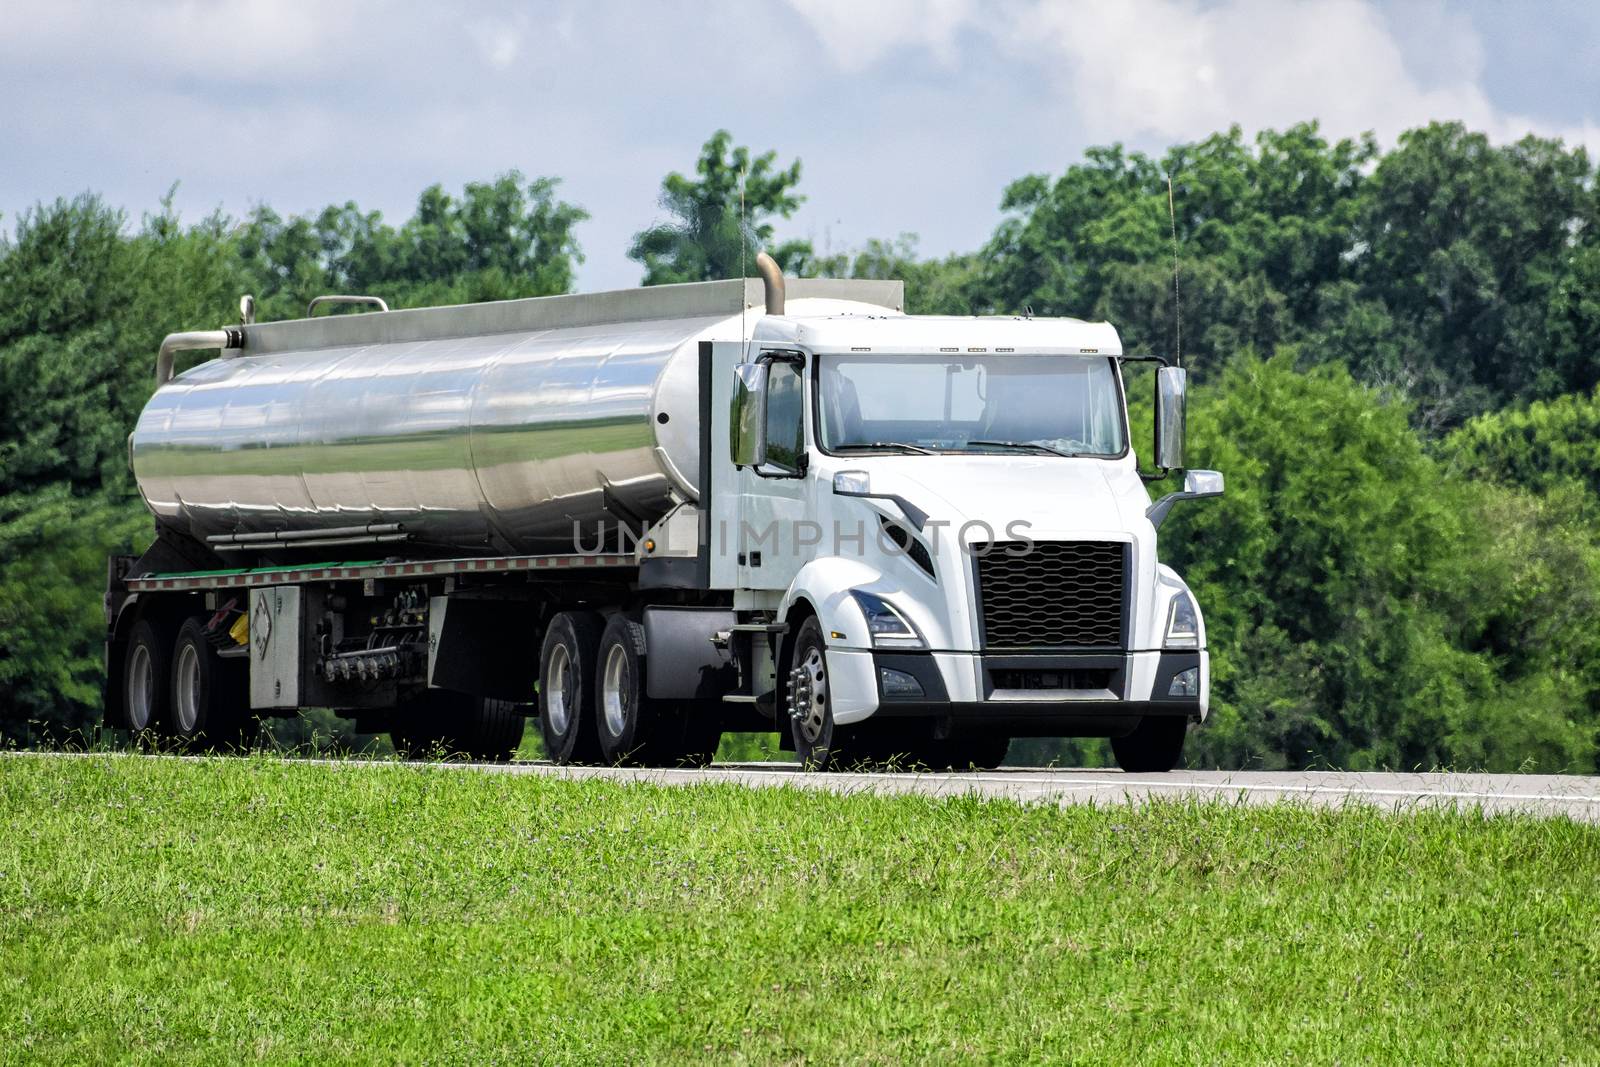 Horizontal shot of an unmarked gasoline delivery tanker truck on the highway.